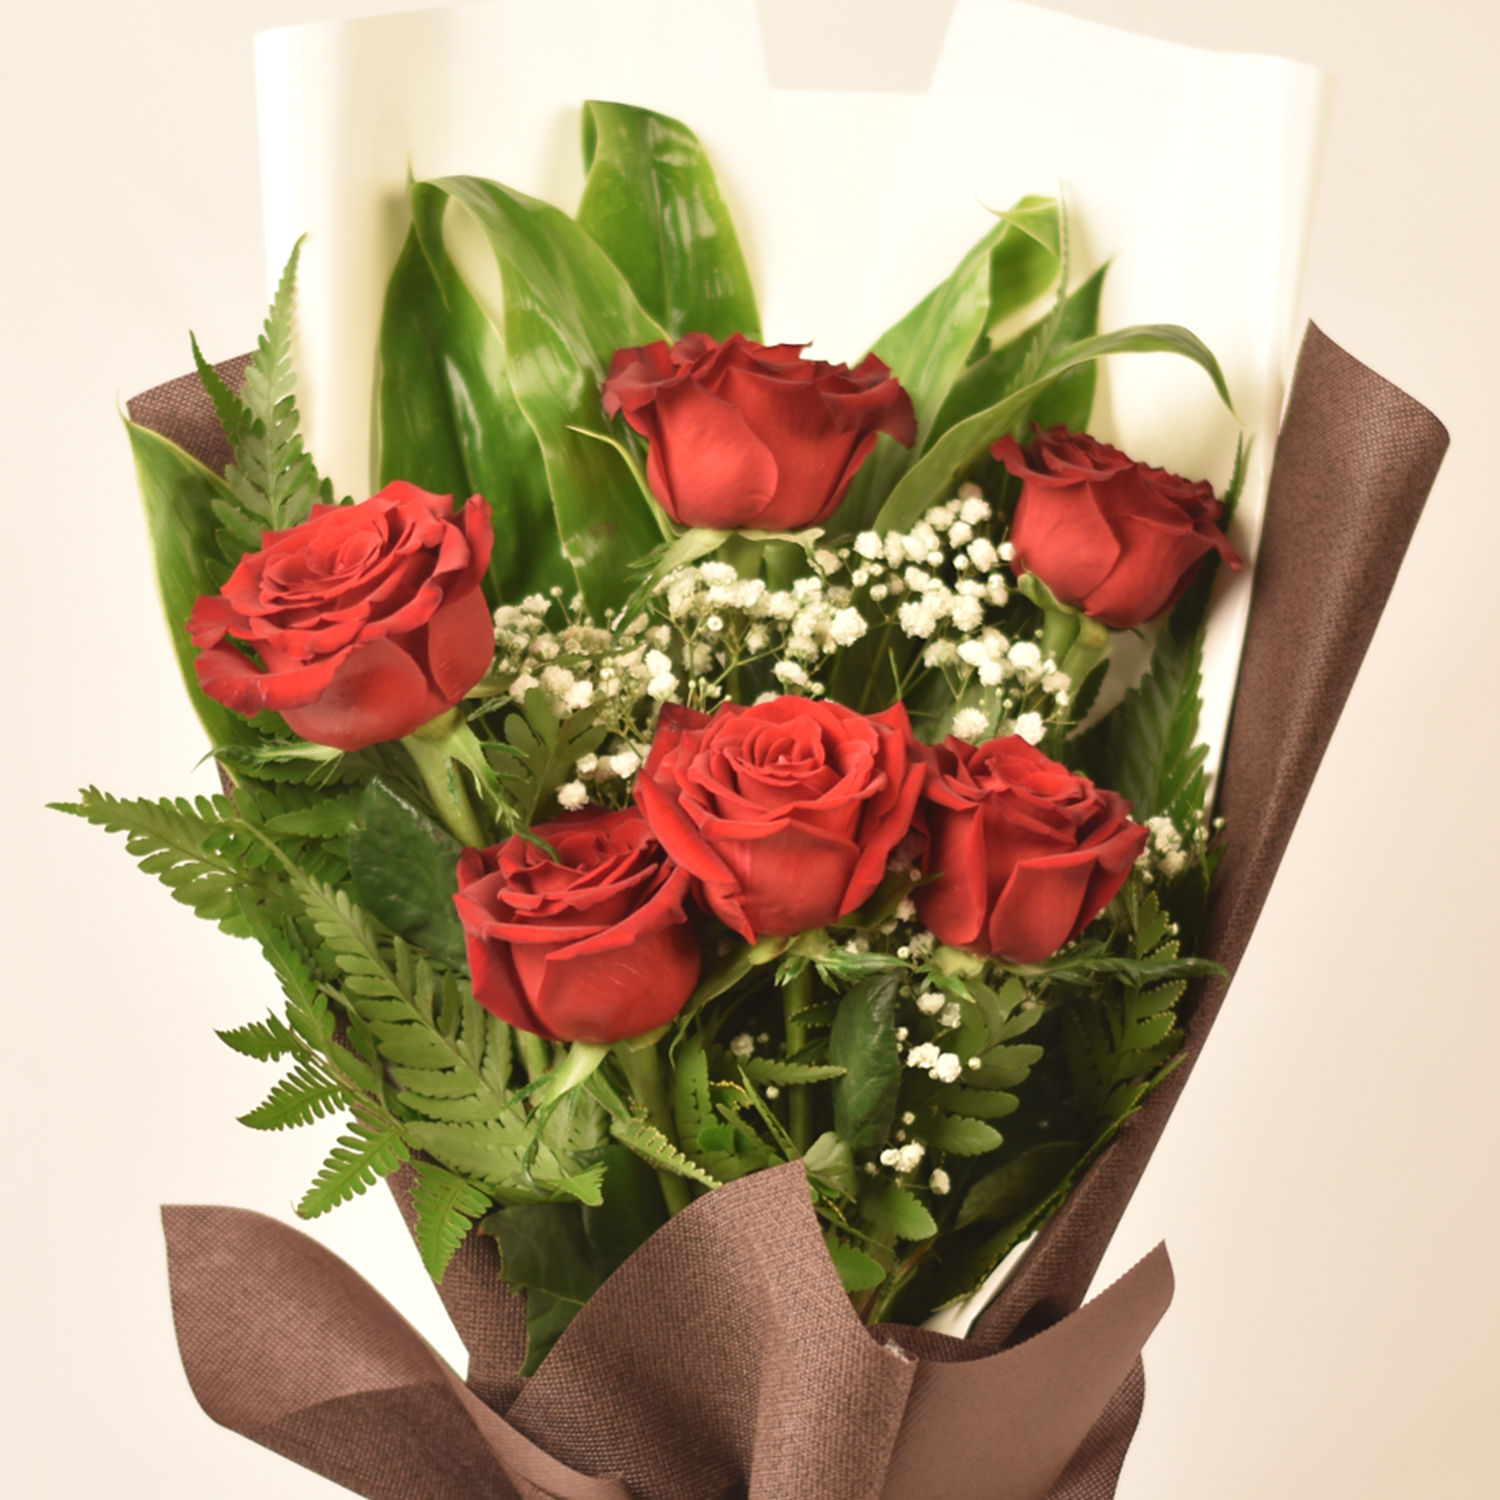 Romantic Red Roses Bouquet Delivery in Singapore - FNP SG